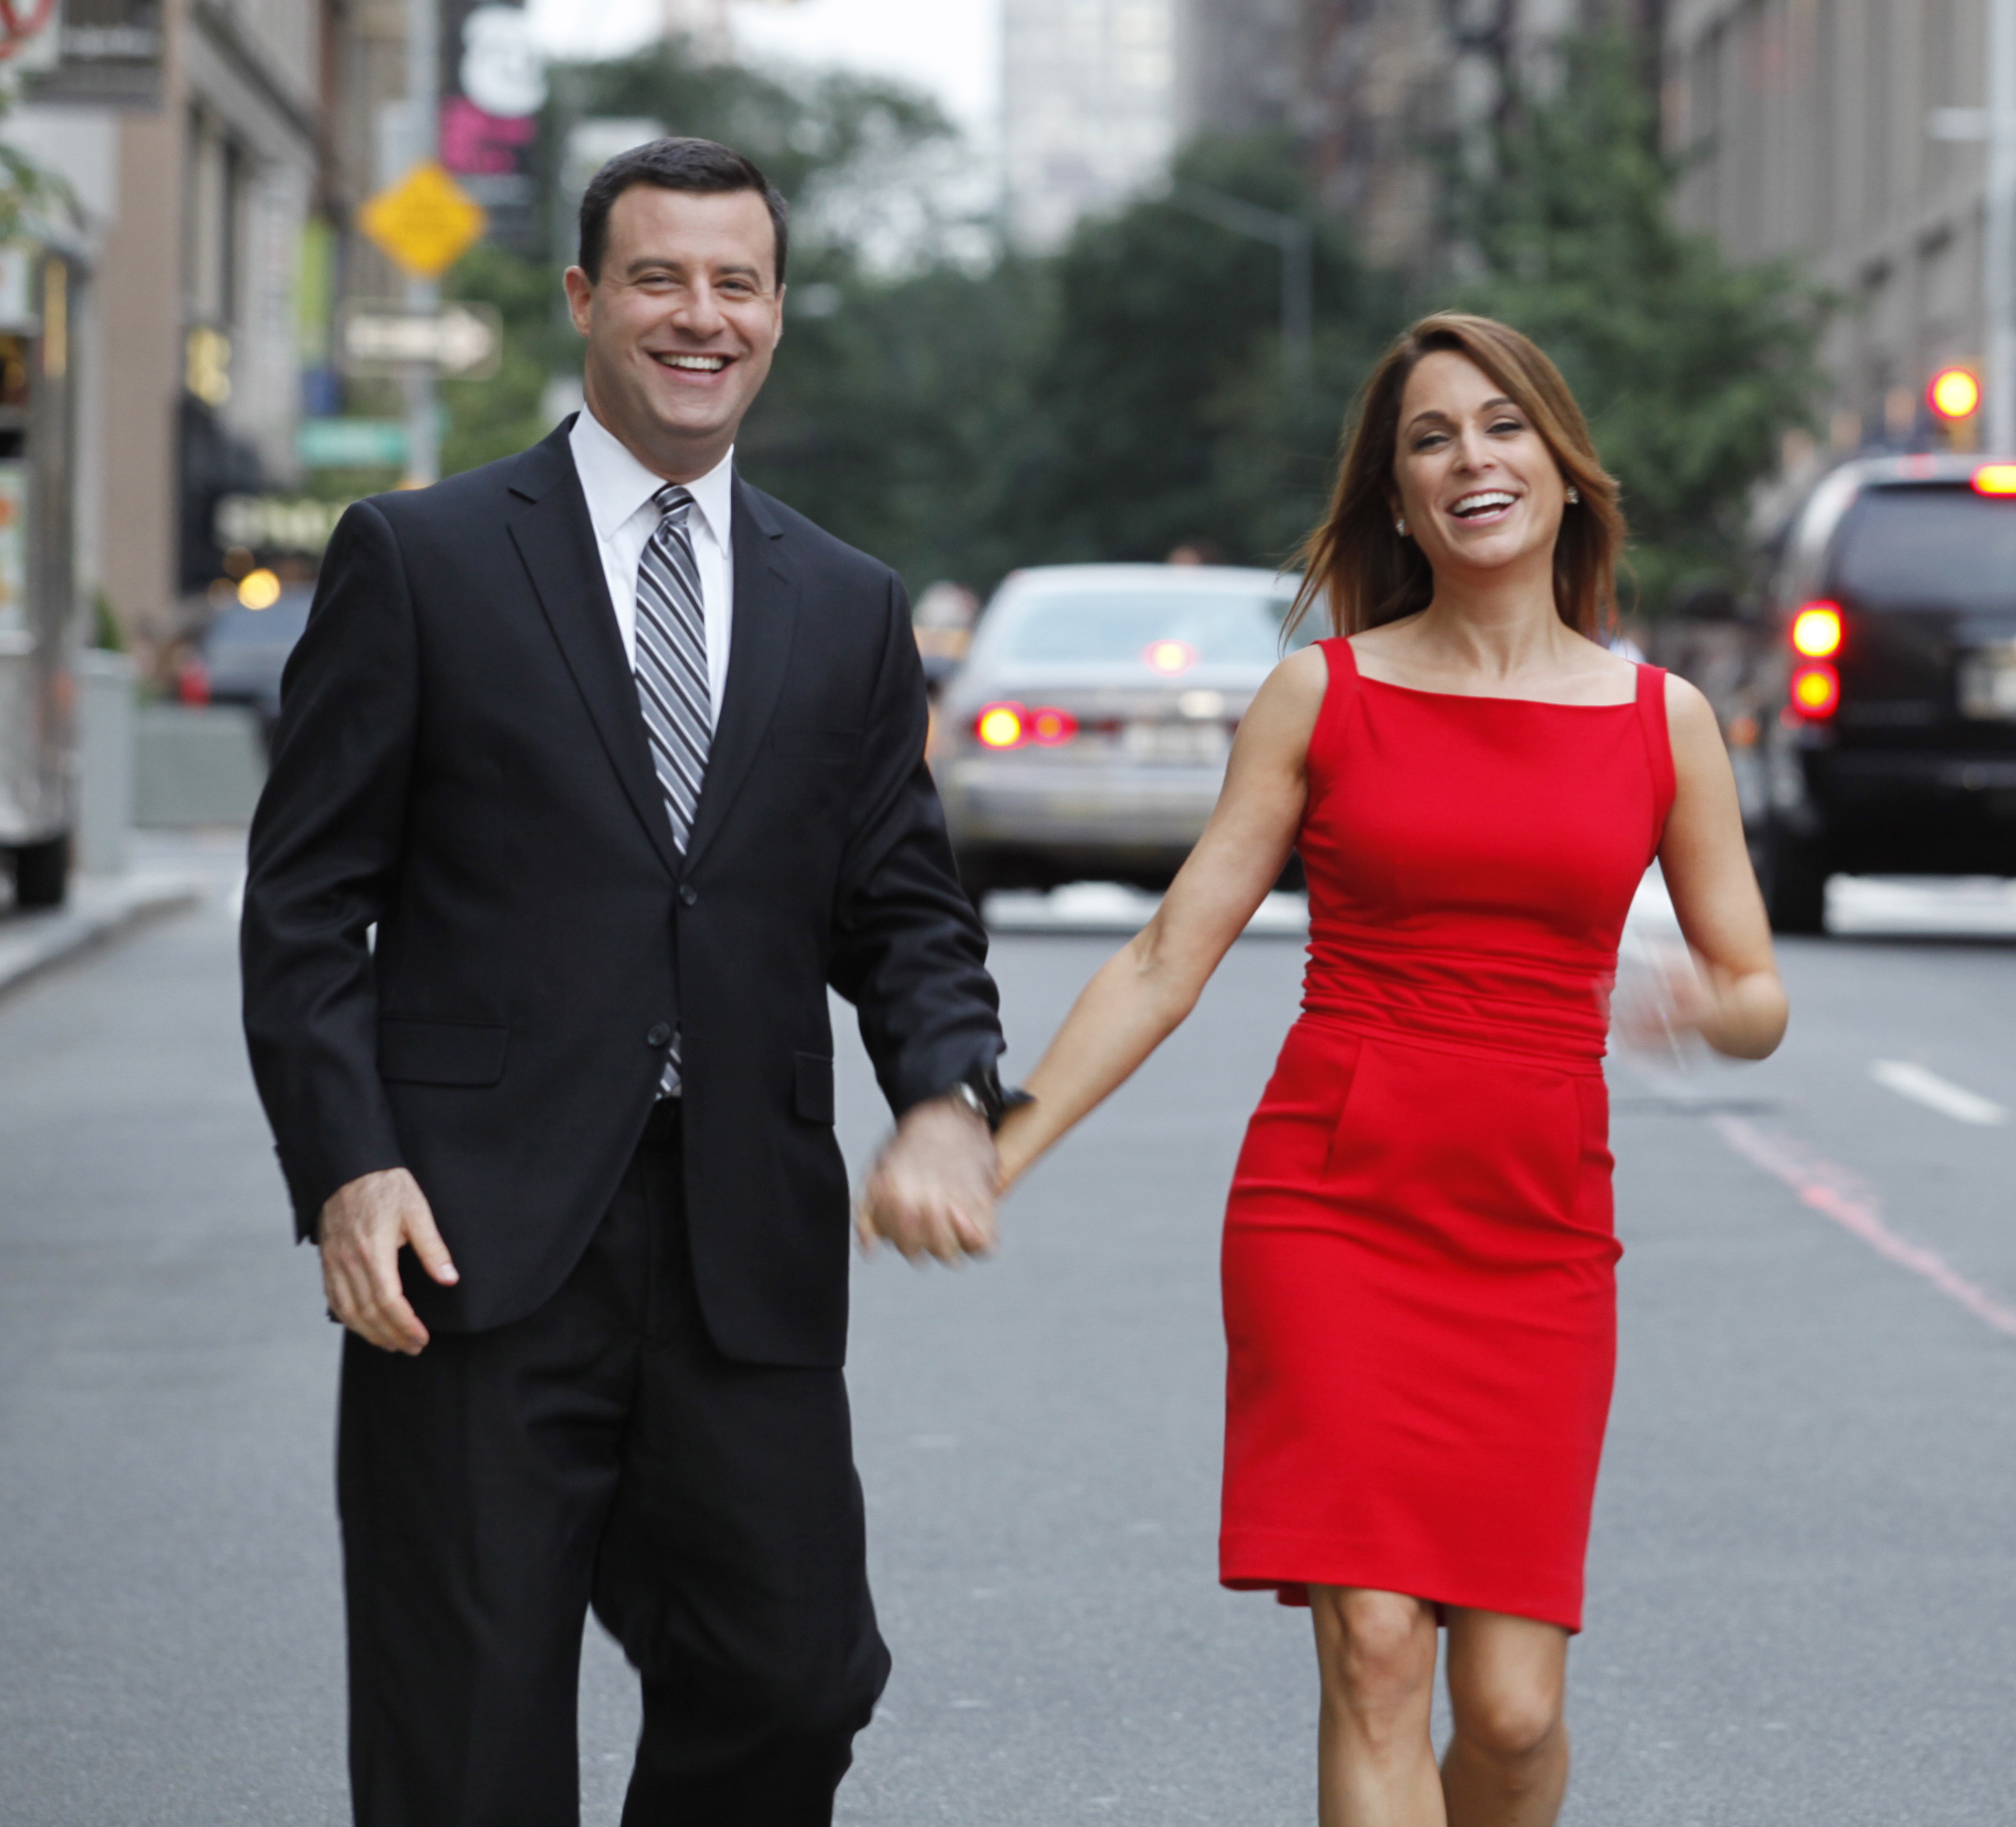 David Shuster and his wife, writer/producer Kera Rennert, in NYC in 2012.